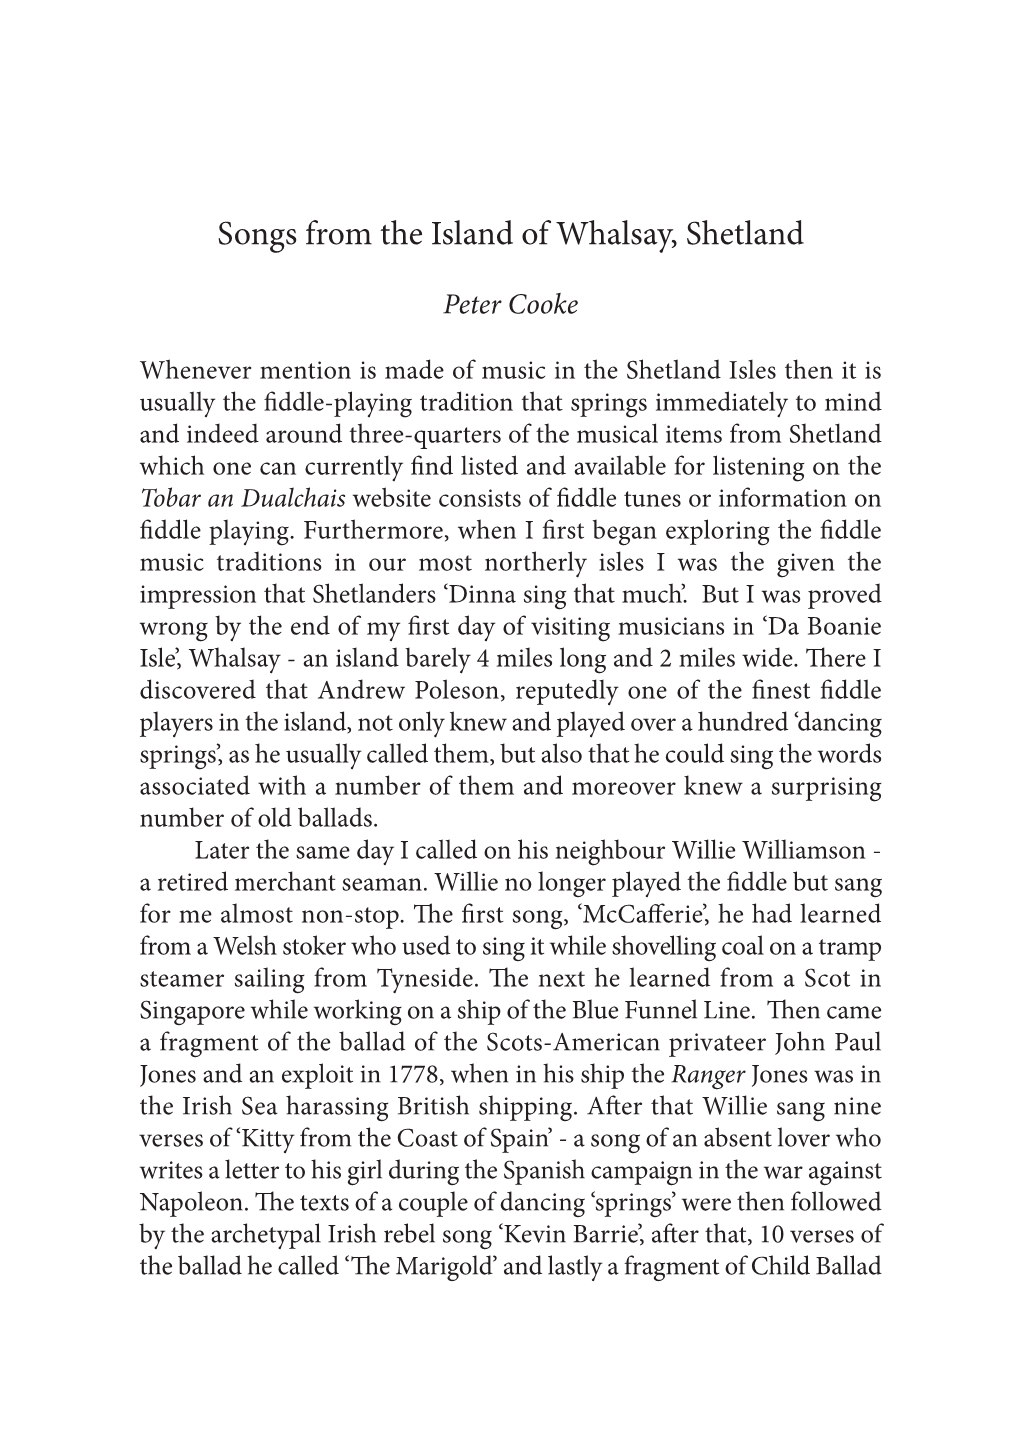 Songs from the Island of Whalsay, Shetland